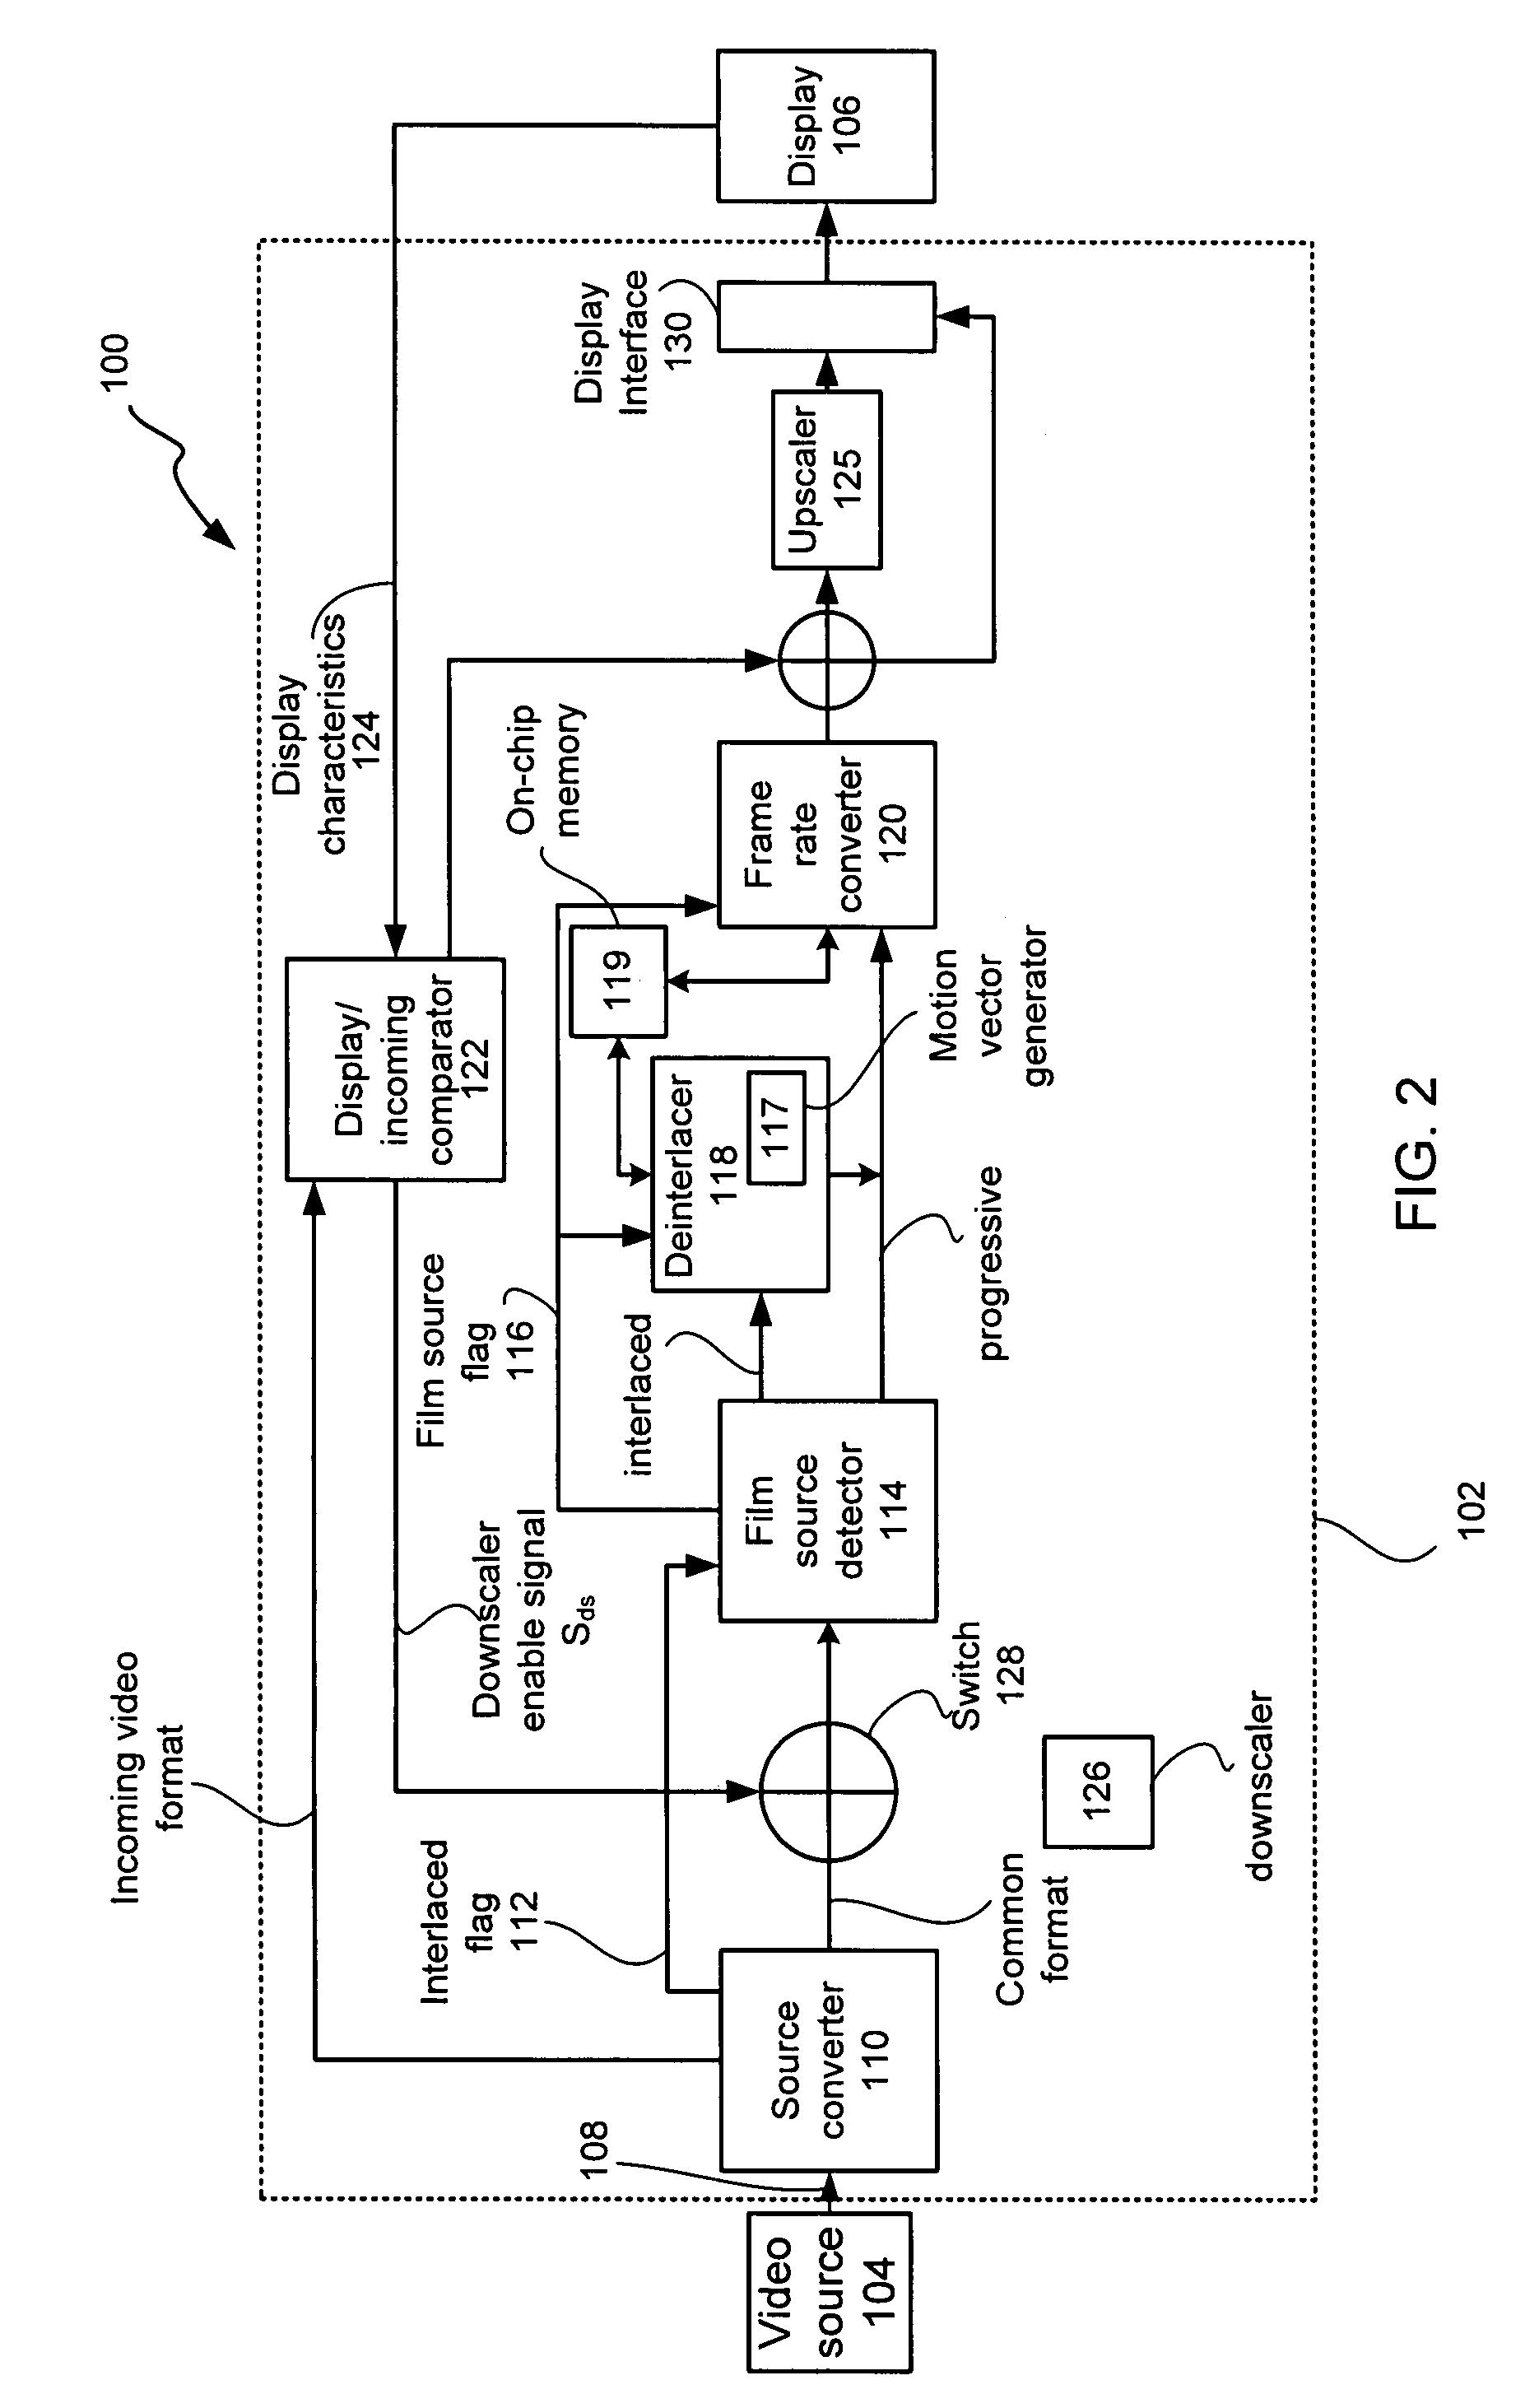 Single chip multi-function display controller and method of use thereof